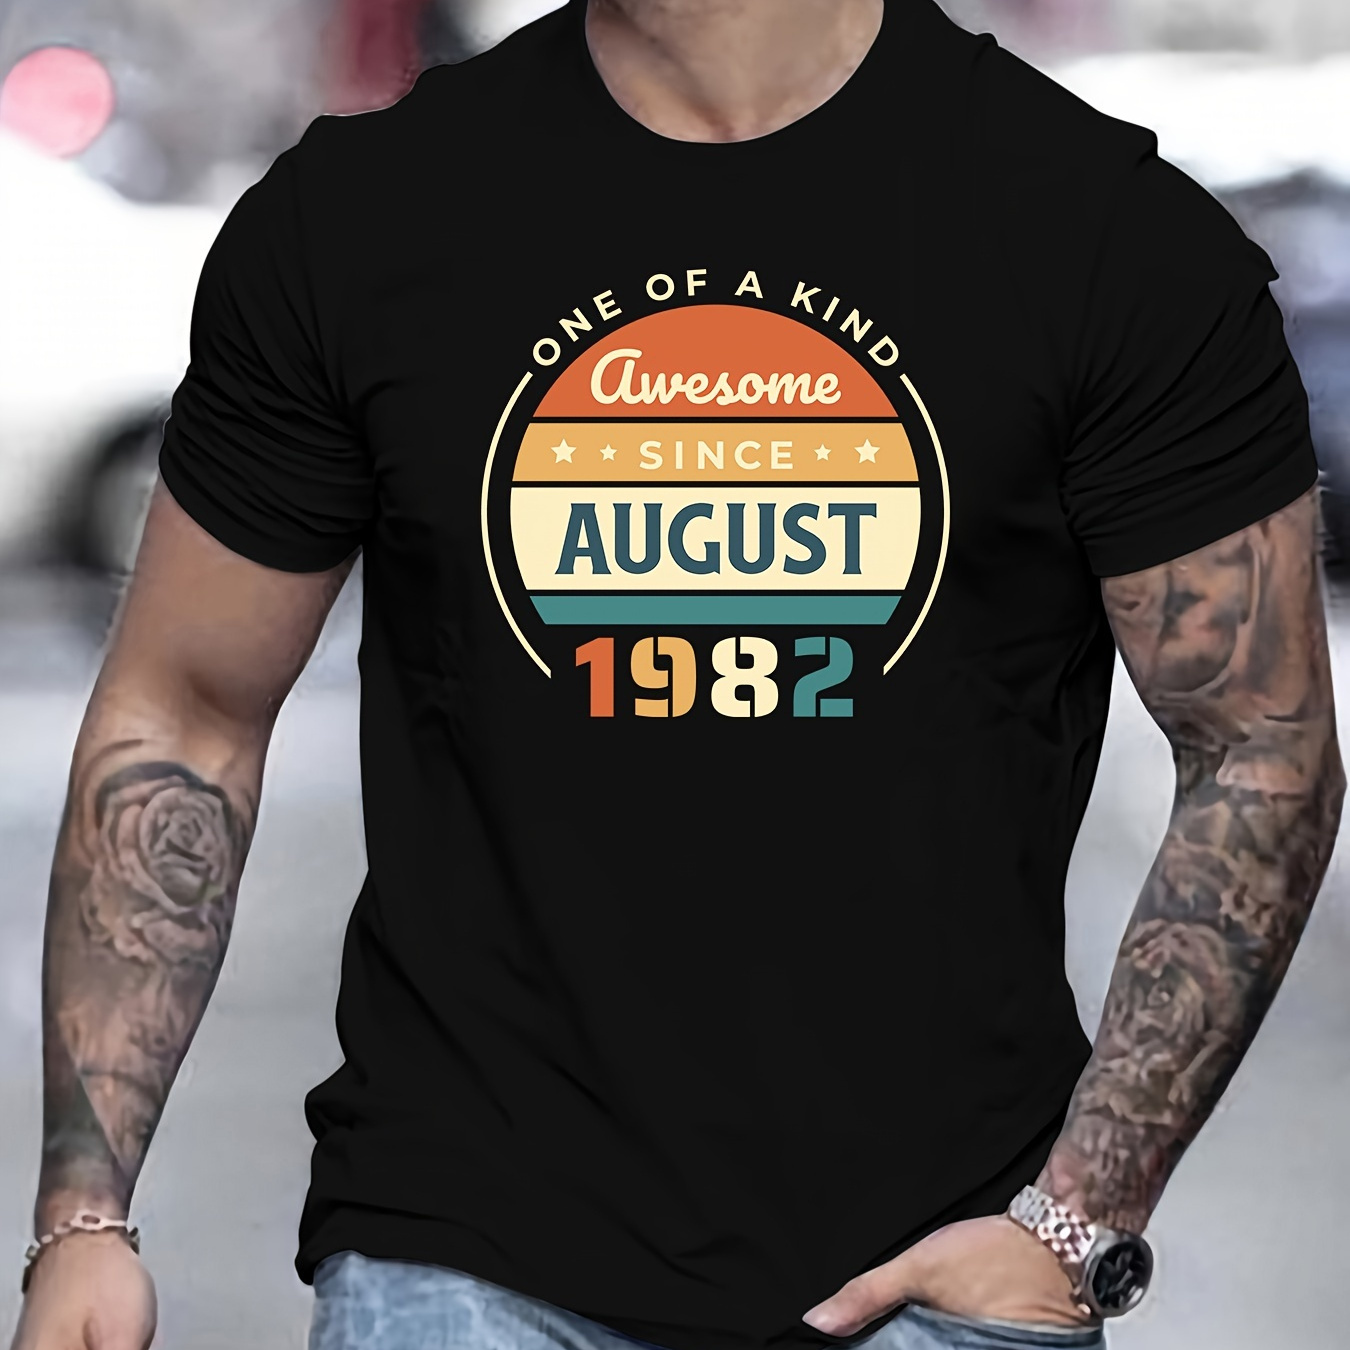 

1 Of A Kind August 1982 Print, Men's Comfy Cotton T-shirt, Casual Fit Tee, Cool Top Clothing For Men For Summer For Everyday Activities